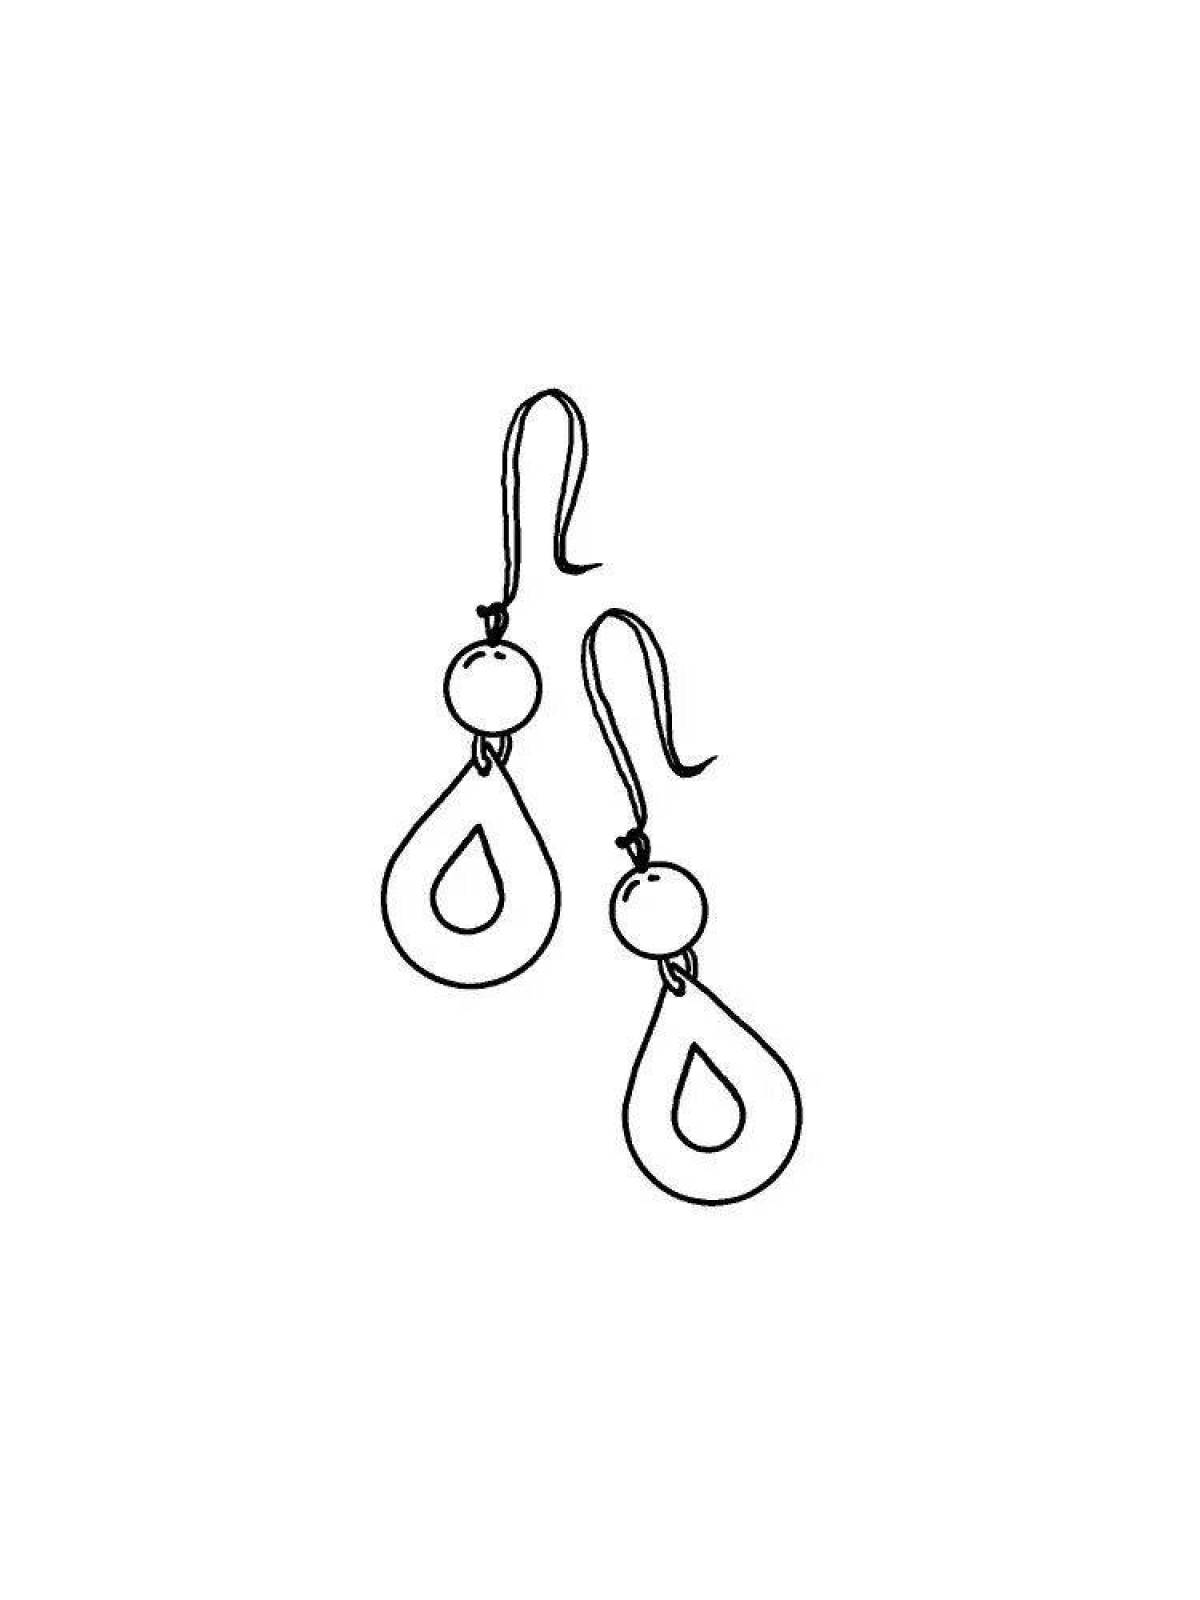 Coloring page stylish earrings